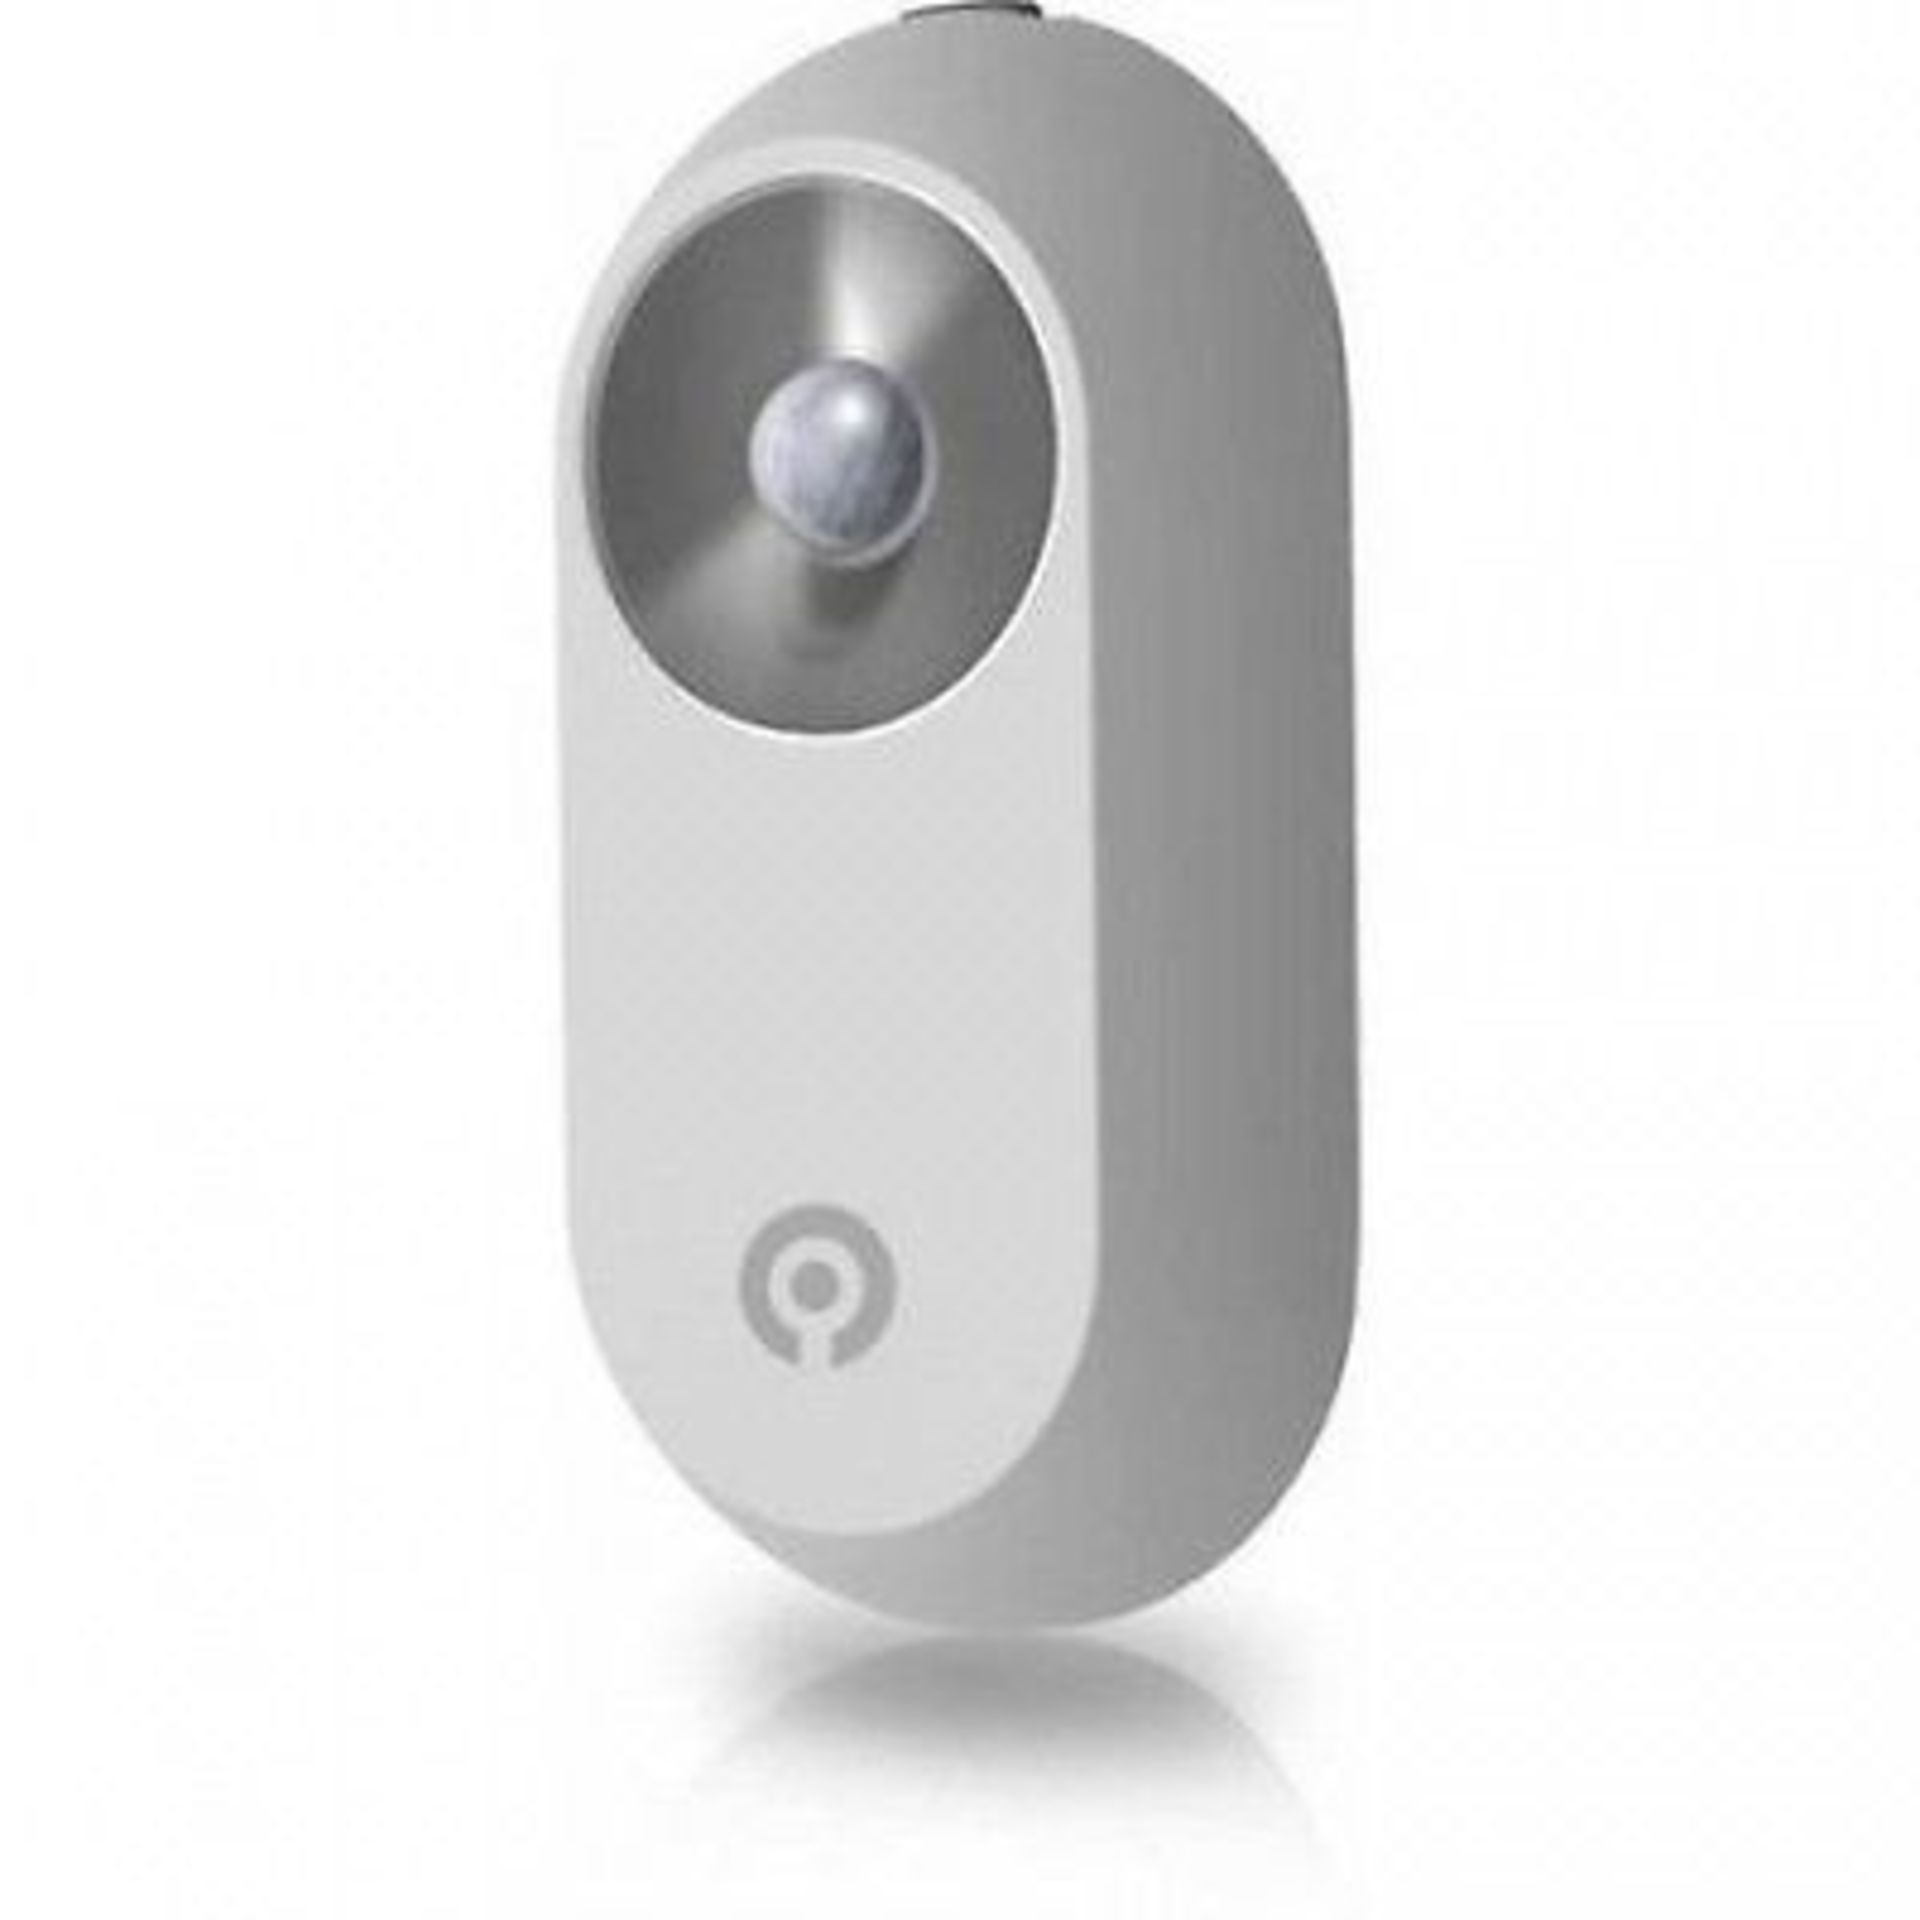 V Grade A Swann One Motion Sensor - Detects activity at any time in any lighting conditions -